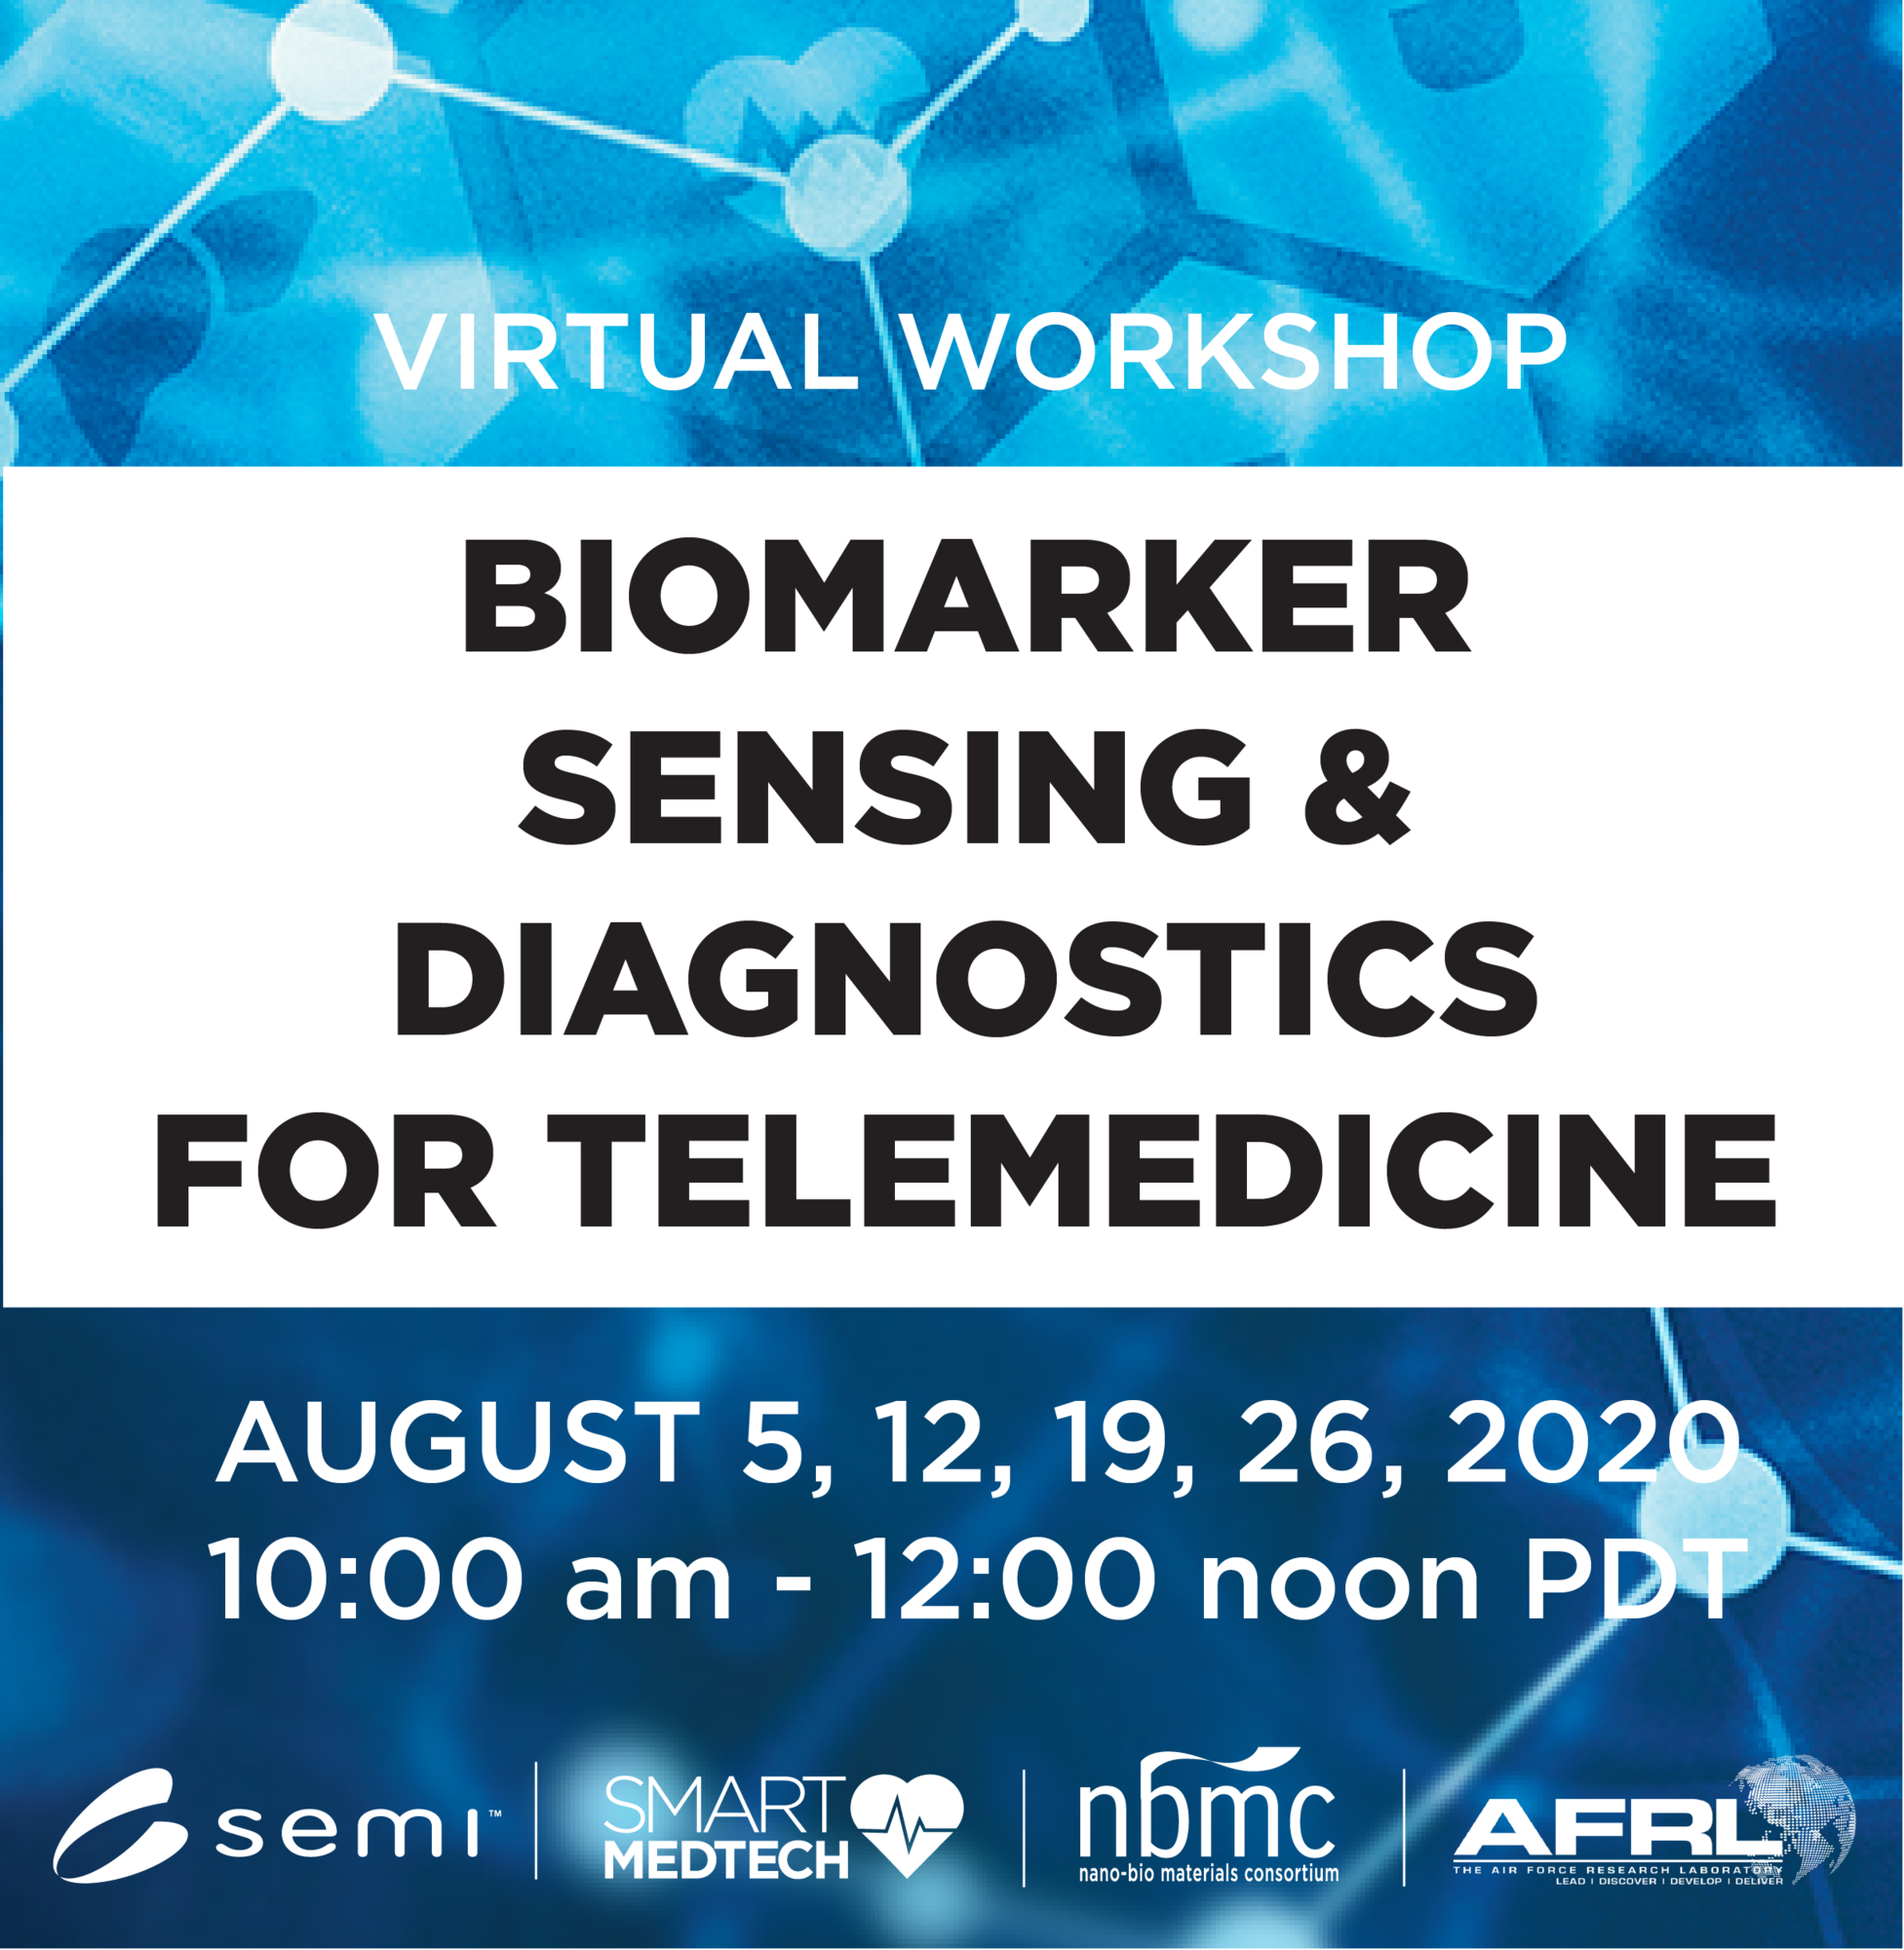 Because of the Covid-19 pandemic, the August 2020 SEMI NBMC workshop will be a virtual event. (Courtesy graphic)